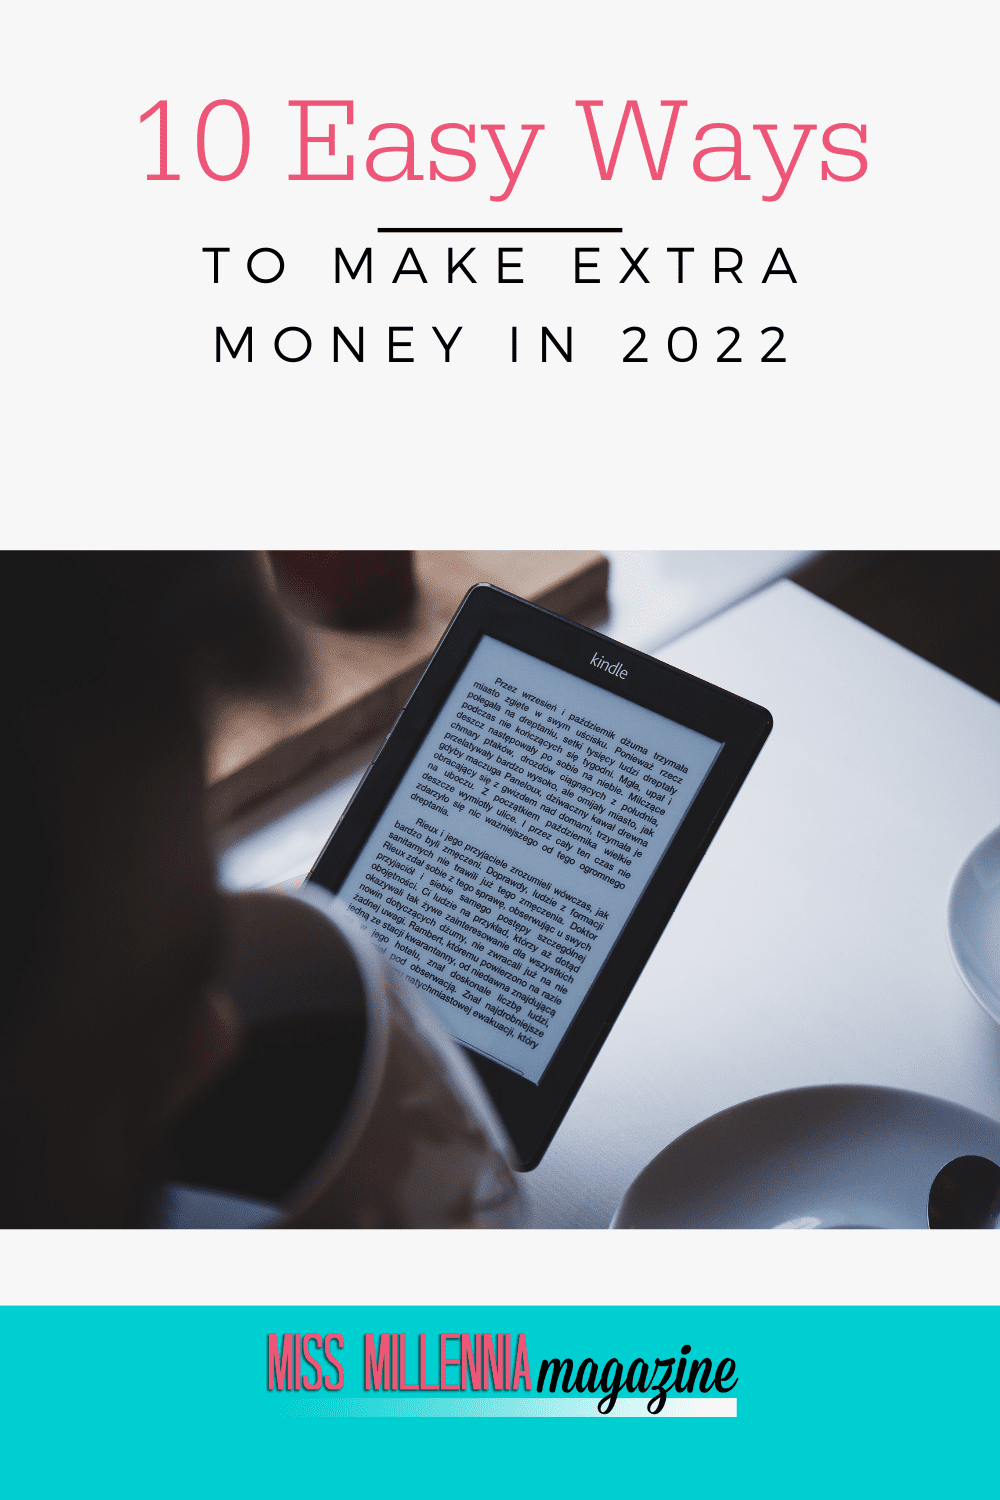 10 Easy Ways to Make Extra Money in 2022